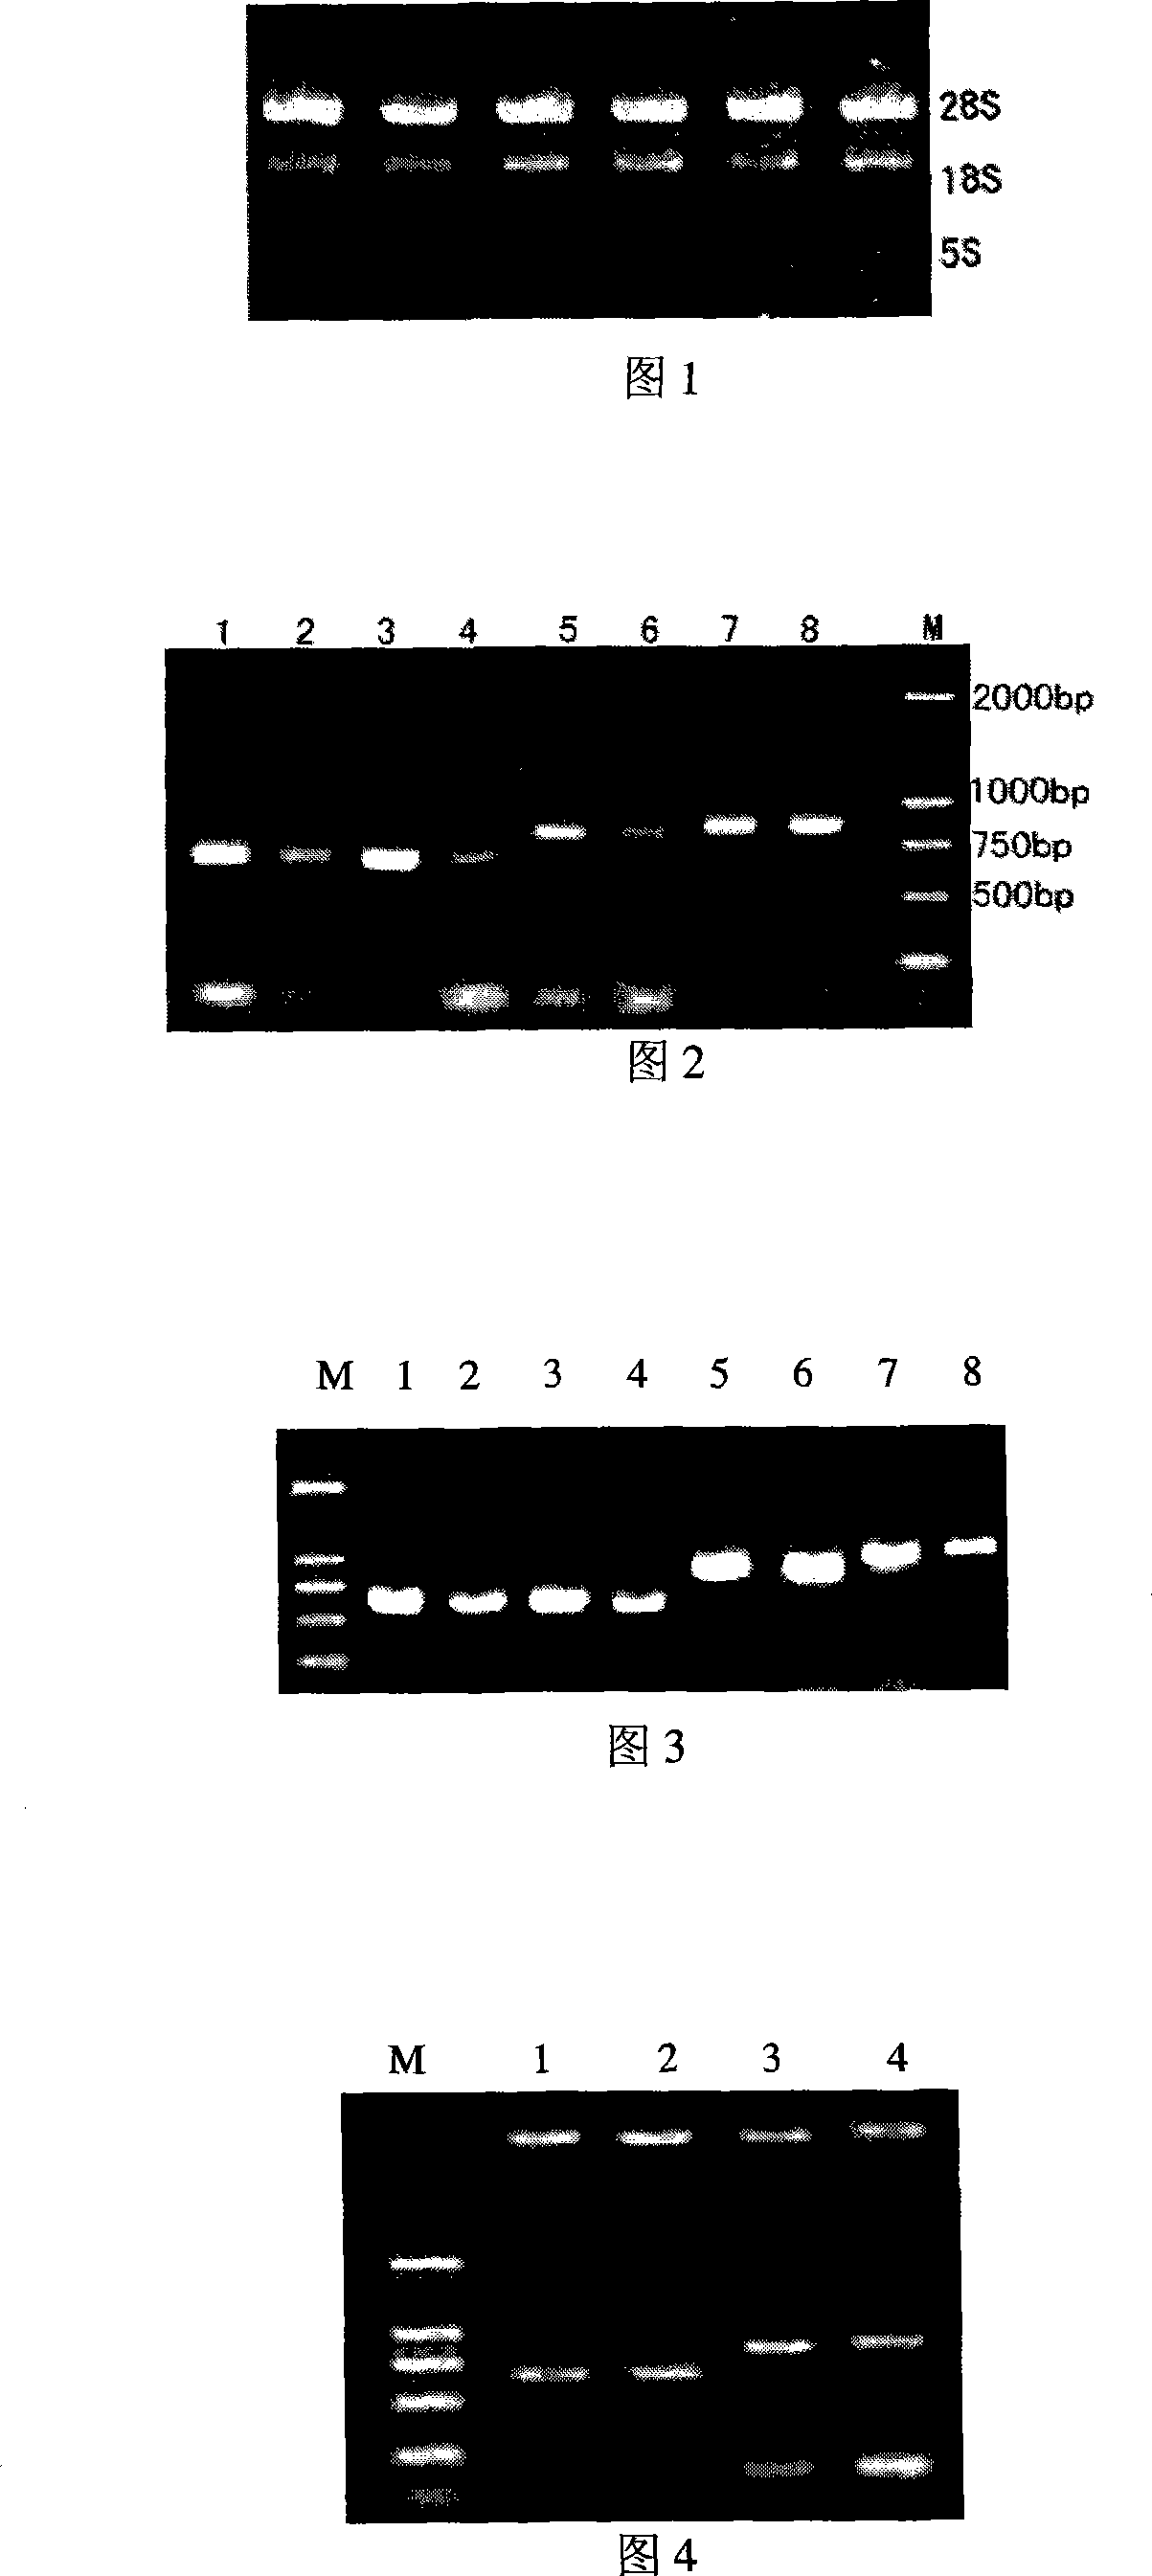 Representation method for recombinant american cockroaches allergen protein